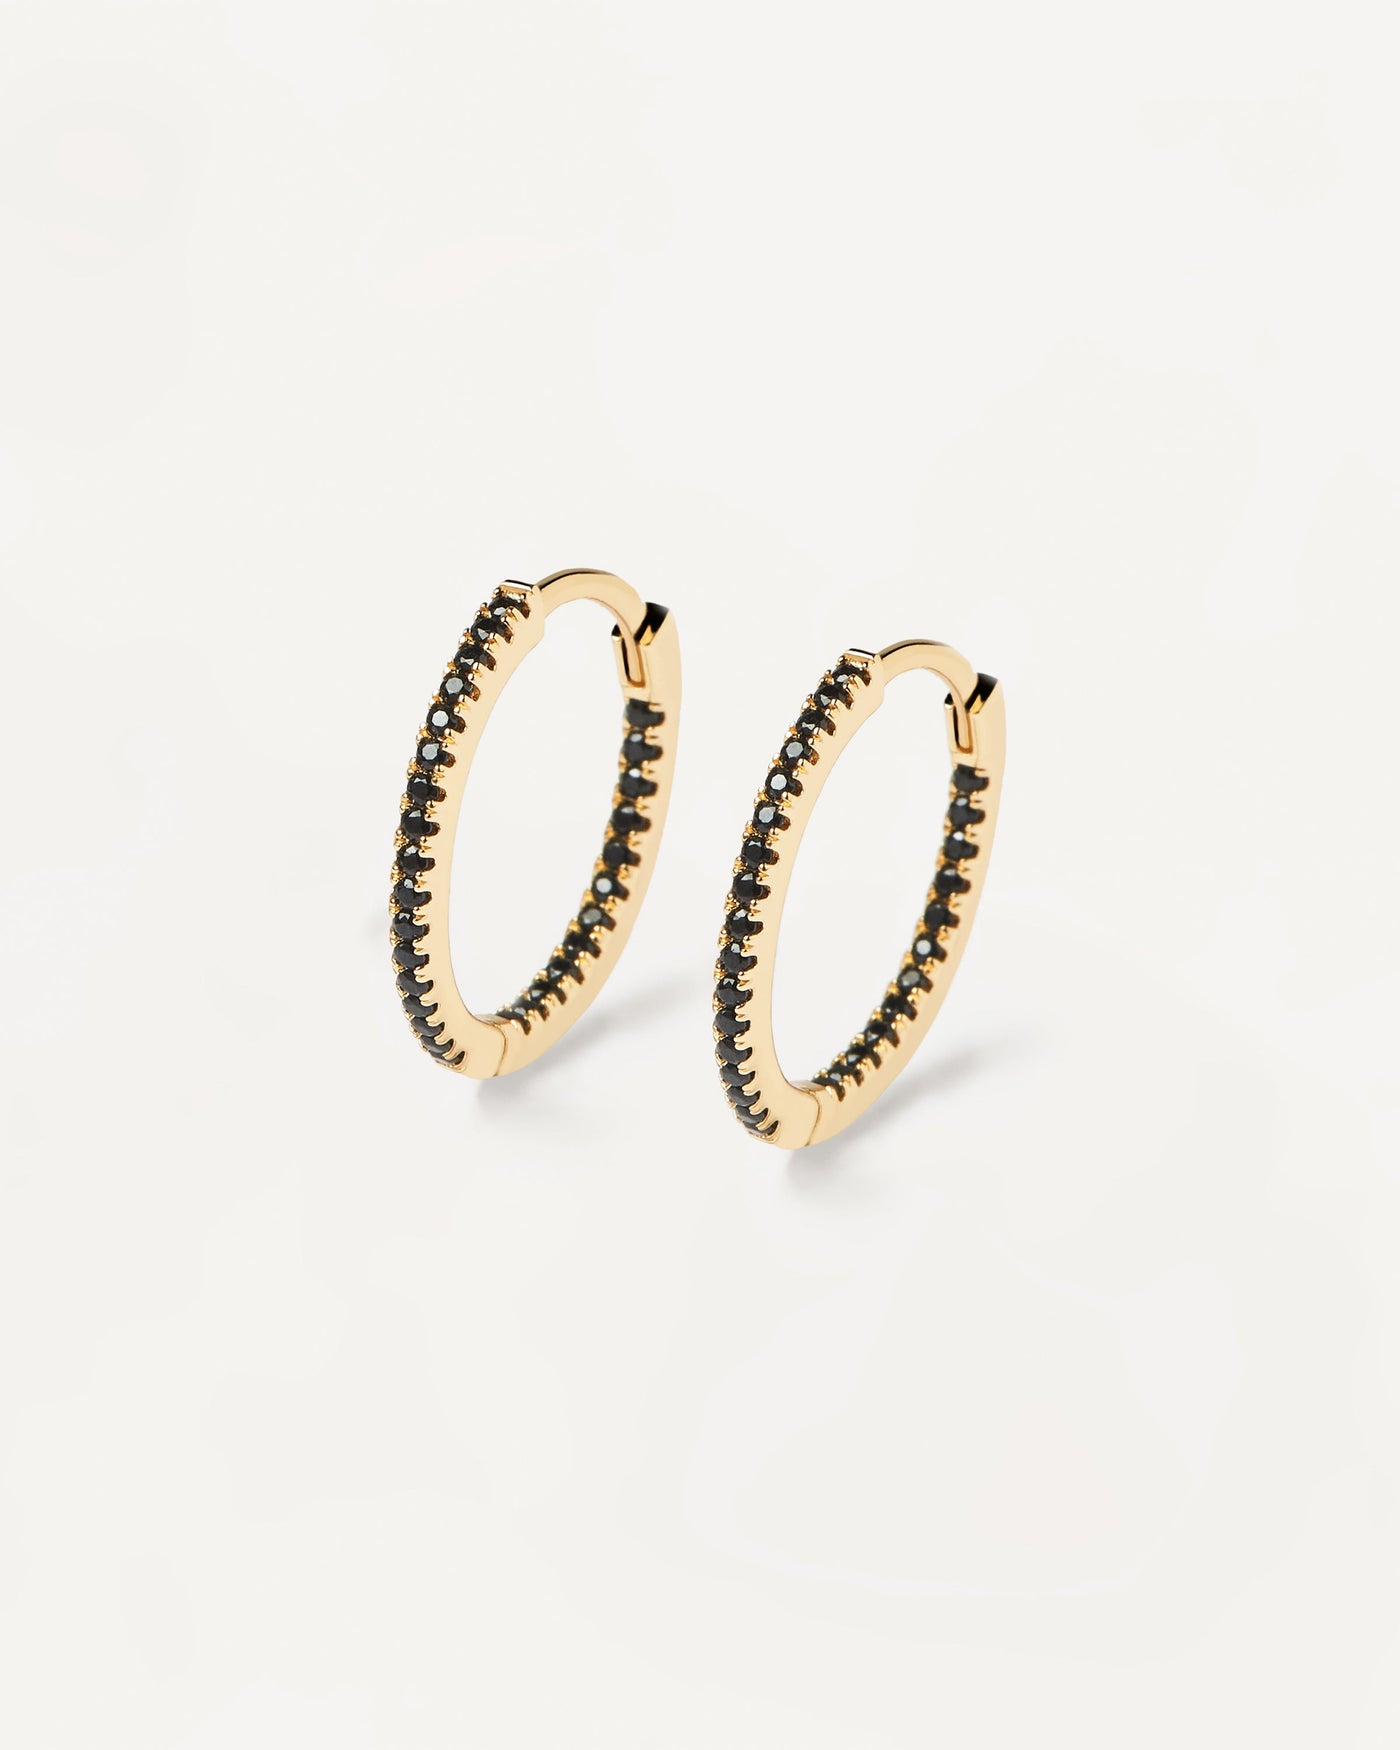 2023 Selection | Black Medium Hoops. Full hoop latch-back earrings in 18k gold plated silver set with black zirconia. Get the latest arrival from PDPAOLA. Place your order safely and get this Best Seller. Free Shipping.